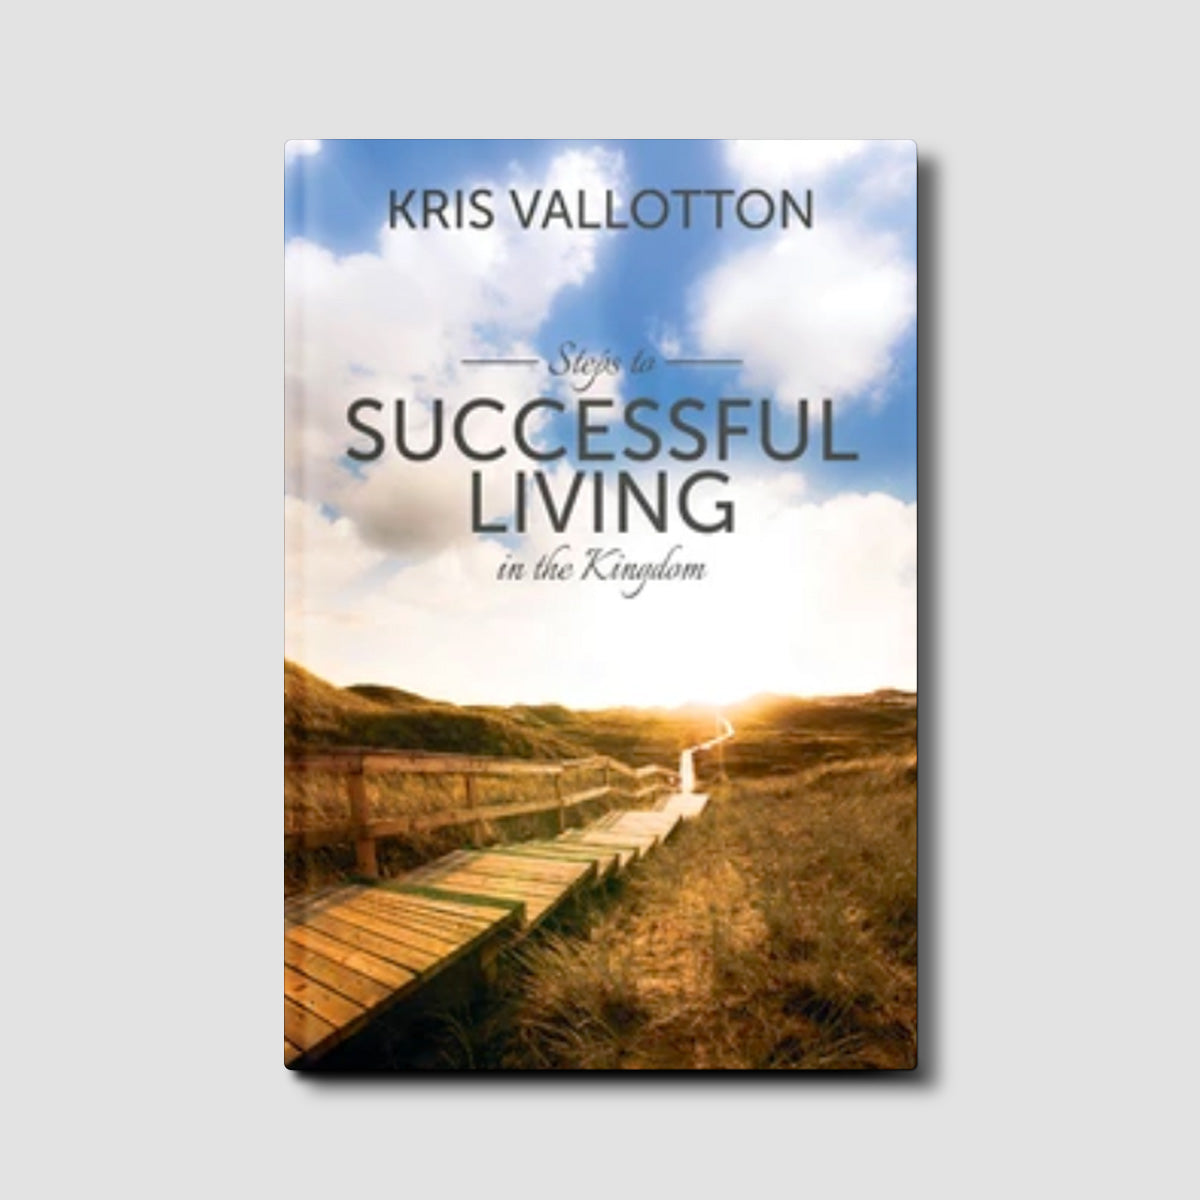 Steps to Successful Living in the Kingdom